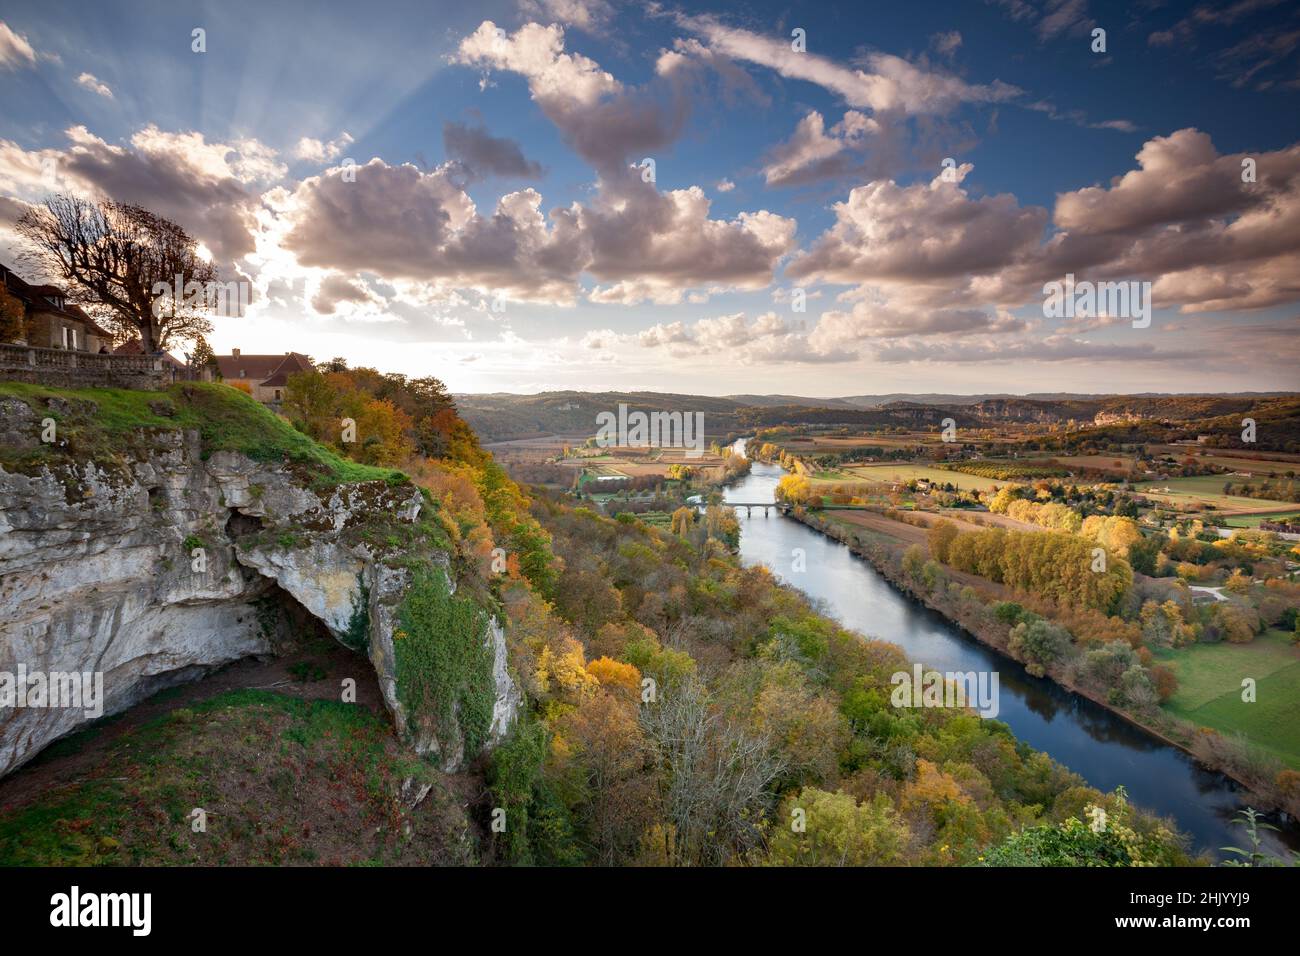 Autumn sunset from viewing point at Domme with the Dordogne valley, Dordogne river, fields and Cenac bridge Domme Dordogne France Stock Photo